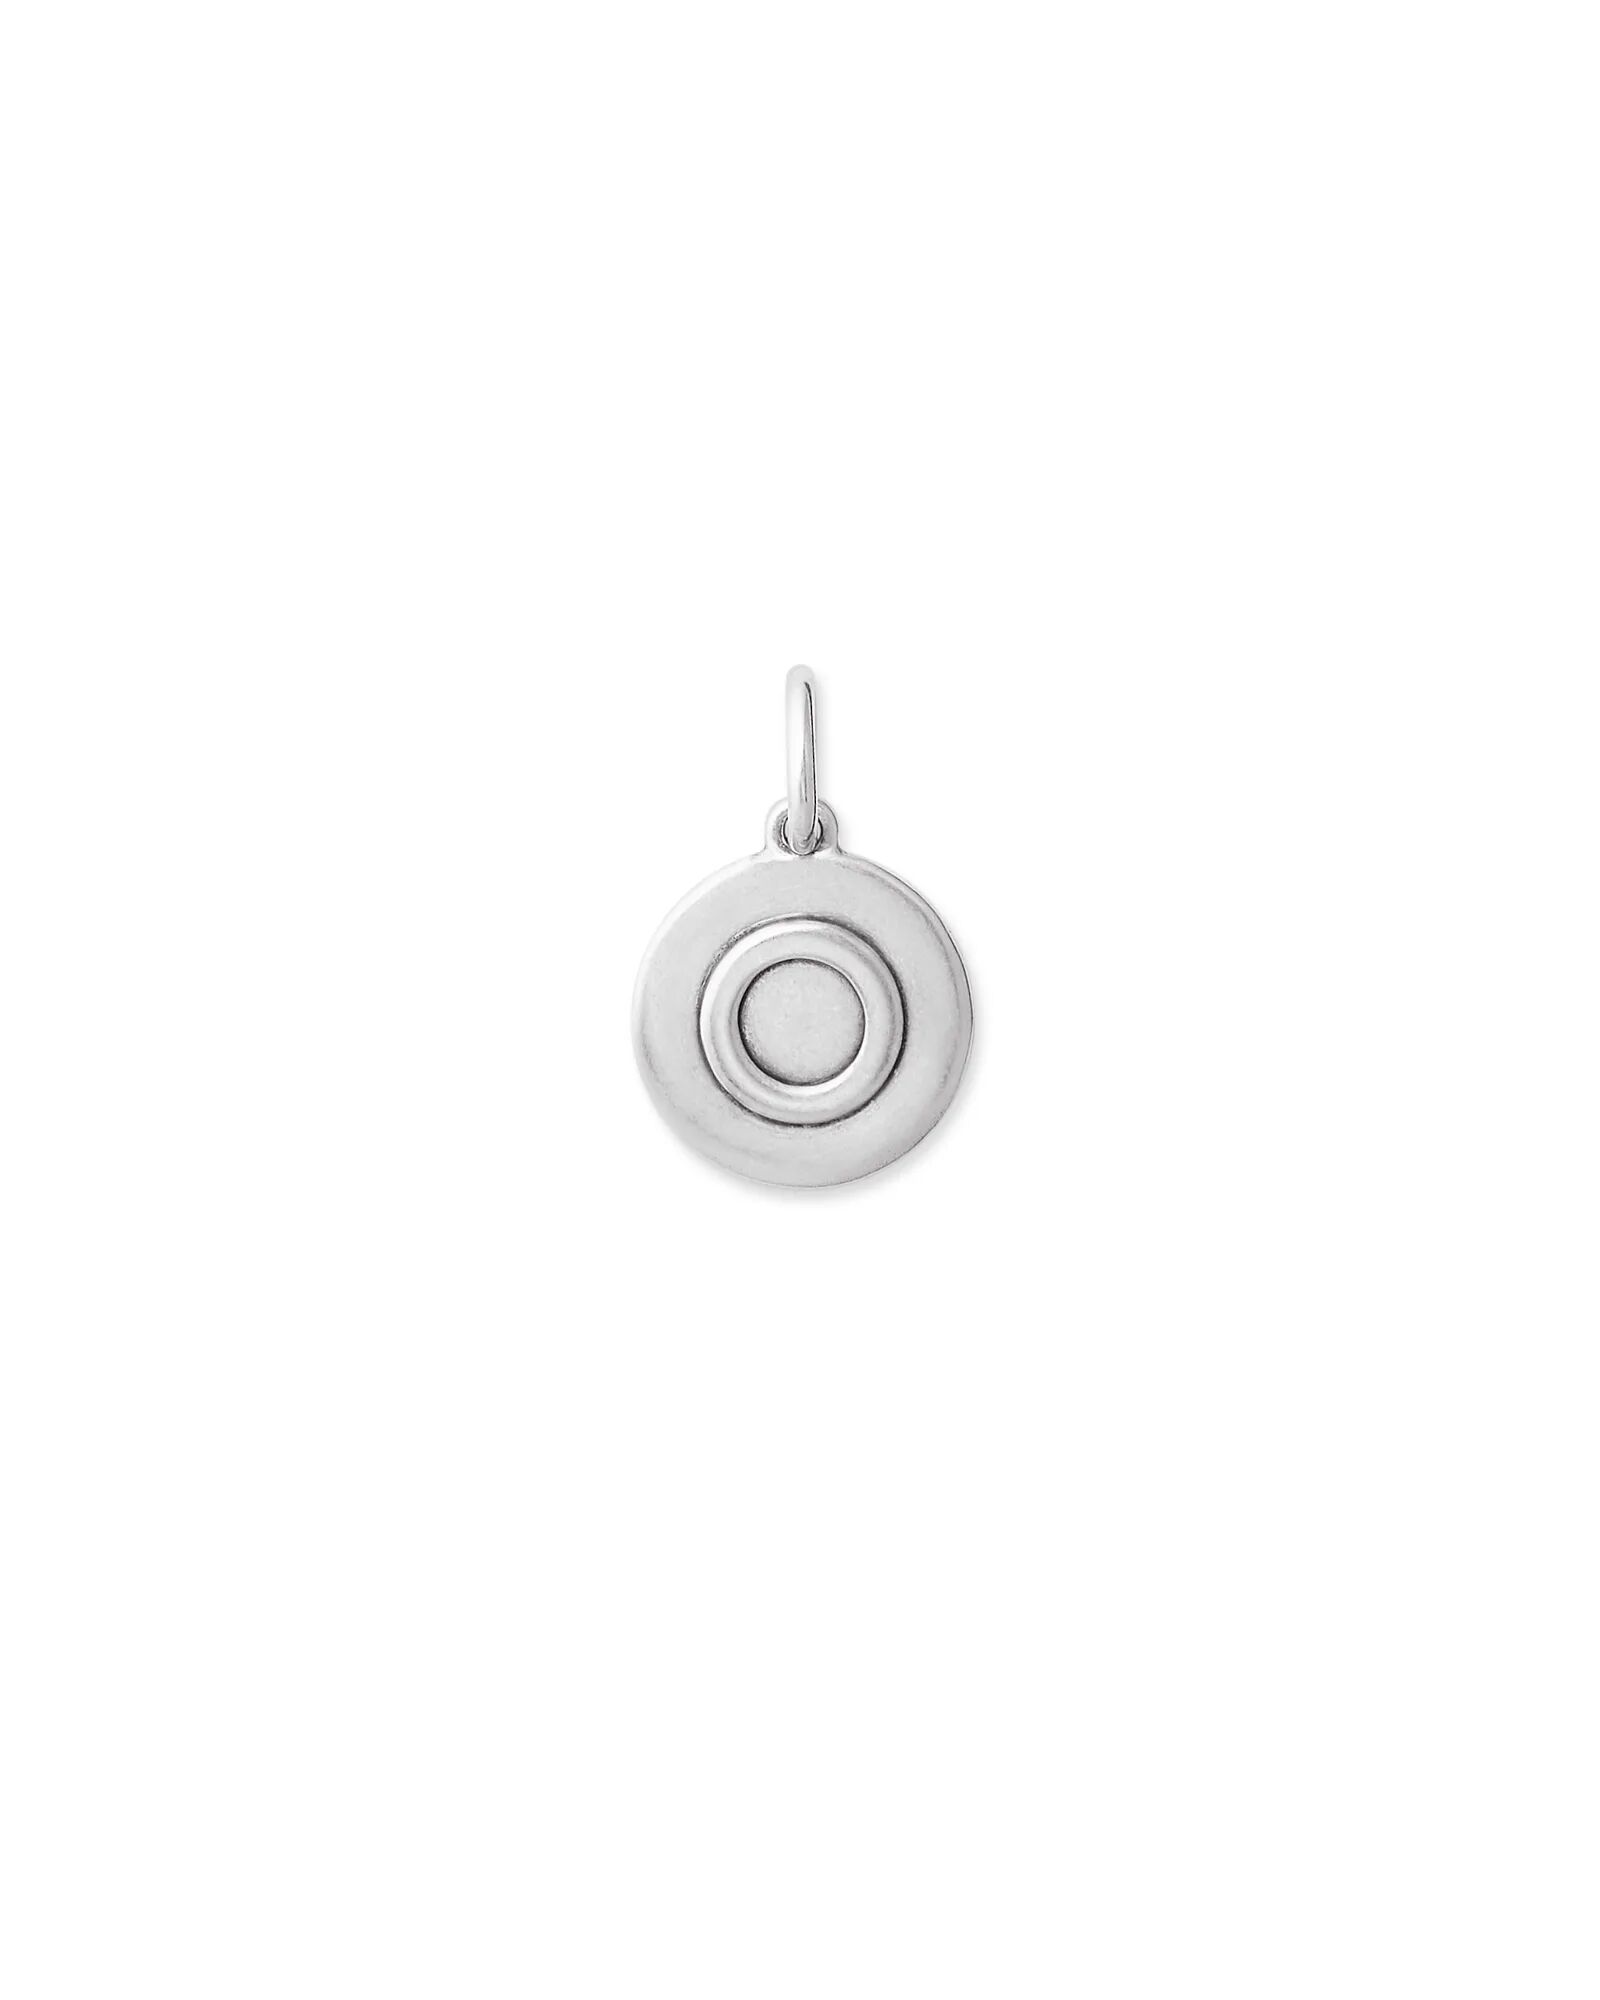 Kendra Scott Letter O Coin Charm in Oxidized Sterling Silver   Metal